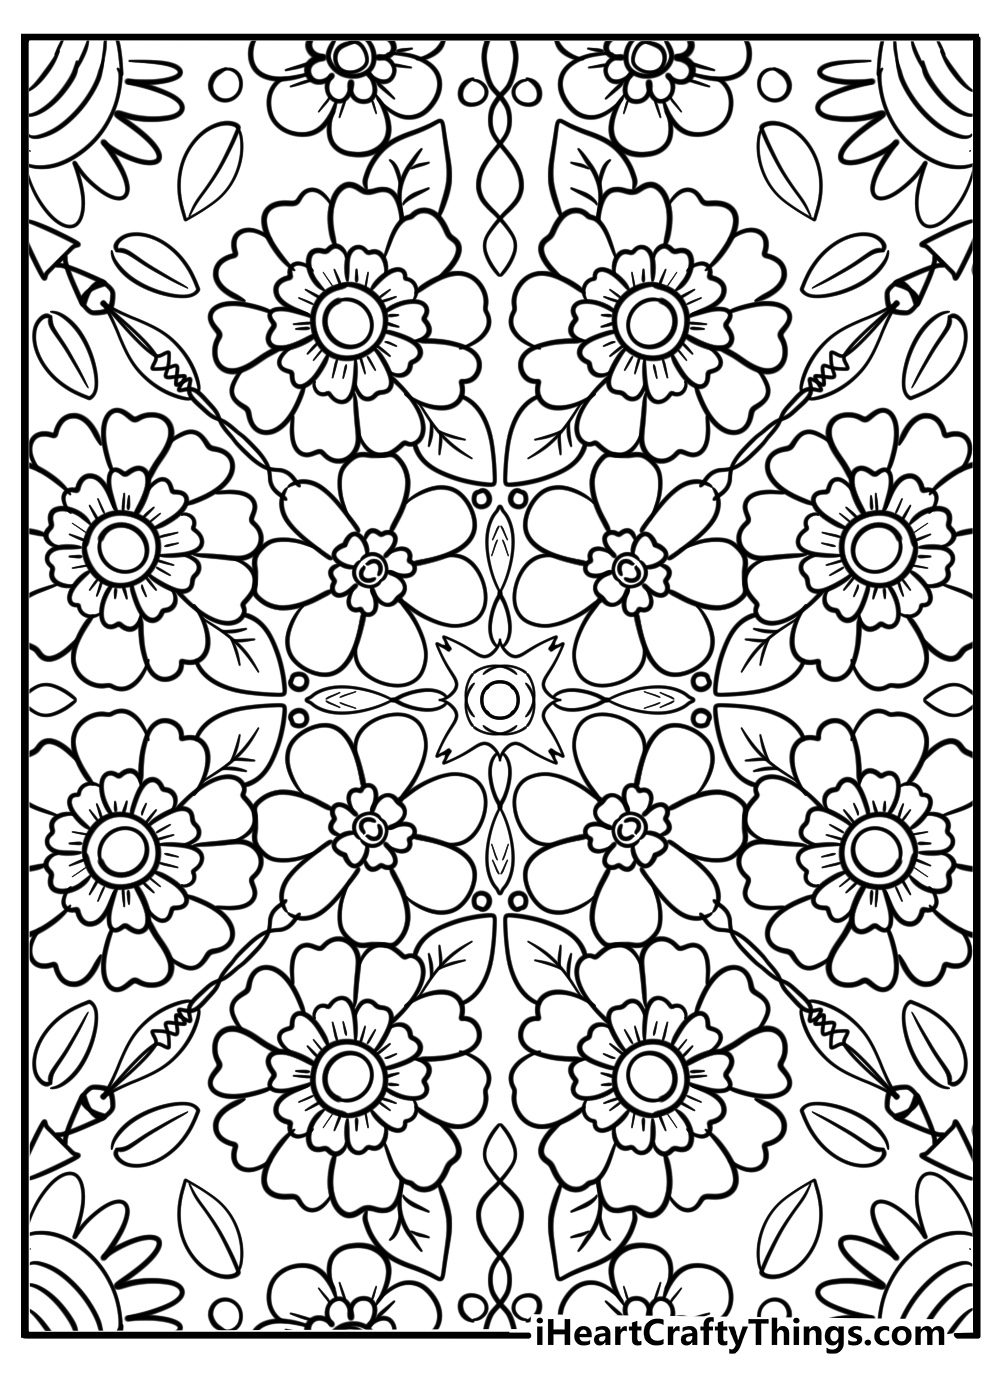 Adult coloring book patterns